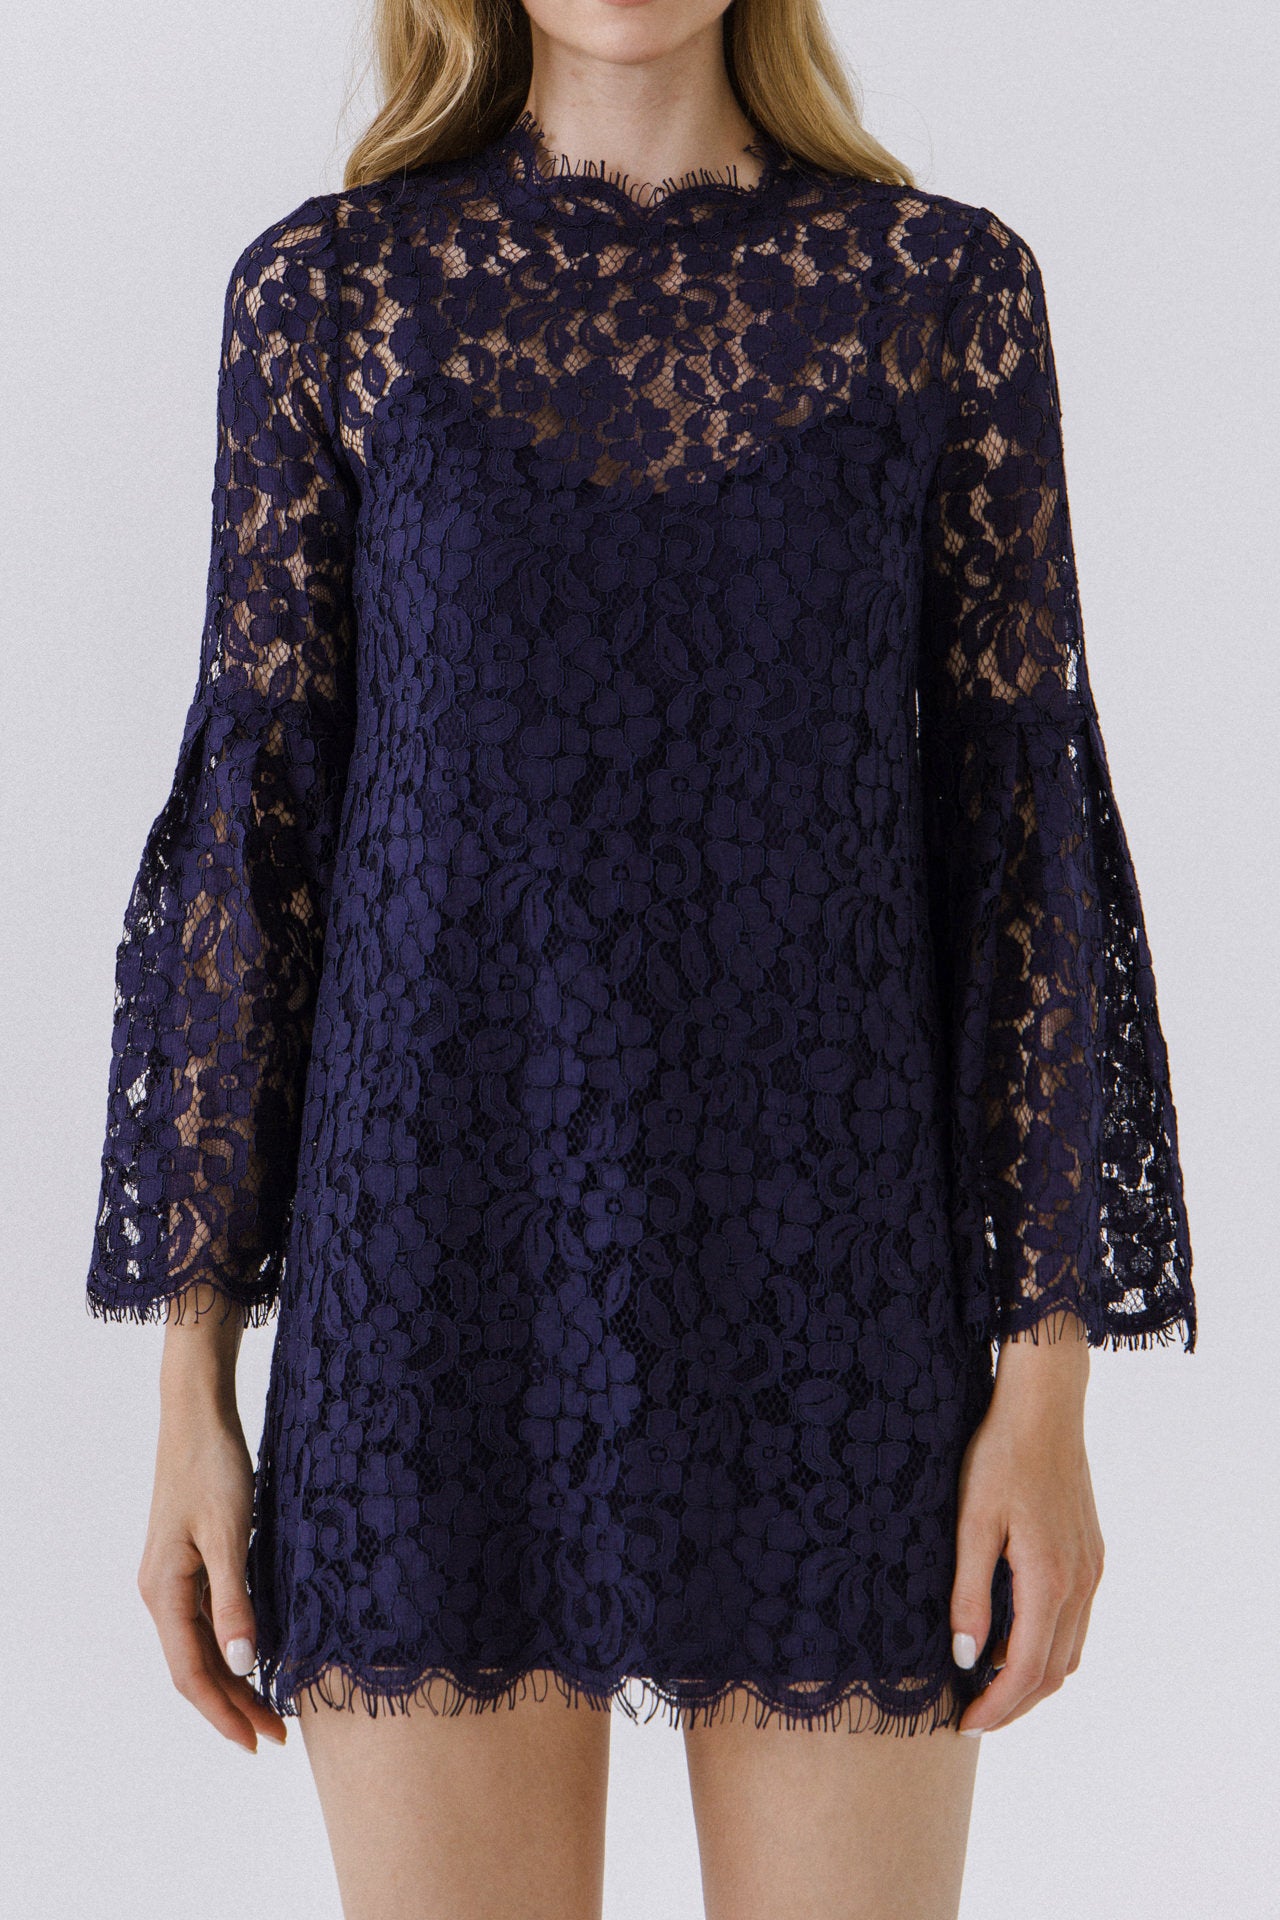 ENDLESS ROSE - Bell Sleeve Lace Dress - DRESSES available at Objectrare